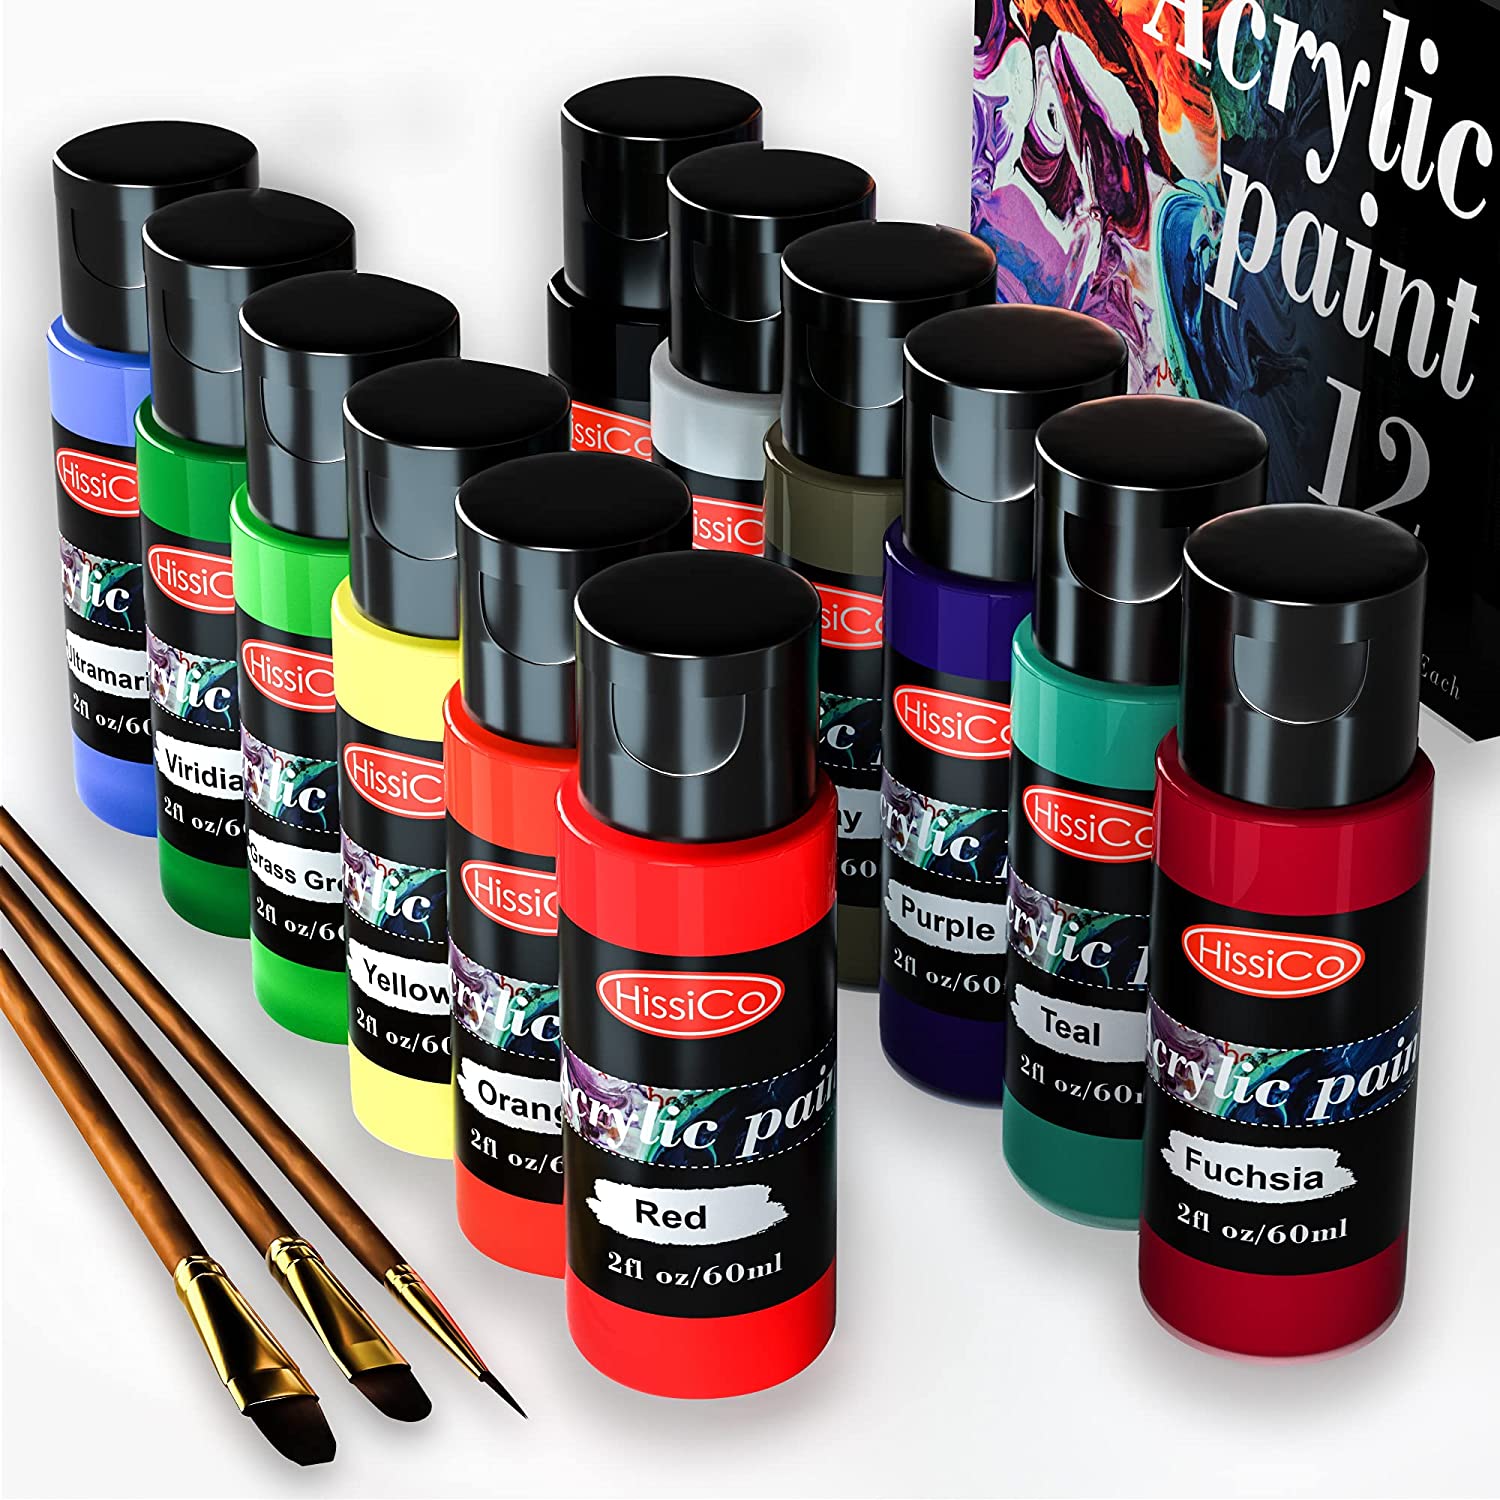  Acrylic Paint Set, Art Paints (2fl Oz60ml ) Crafts Acrylic  Paint For Kids And Adults with 5 Brushes, Non Toxic Metallic Acrylic Paints  for Wood Canvas Crafts Stone Ceramic Model Painting